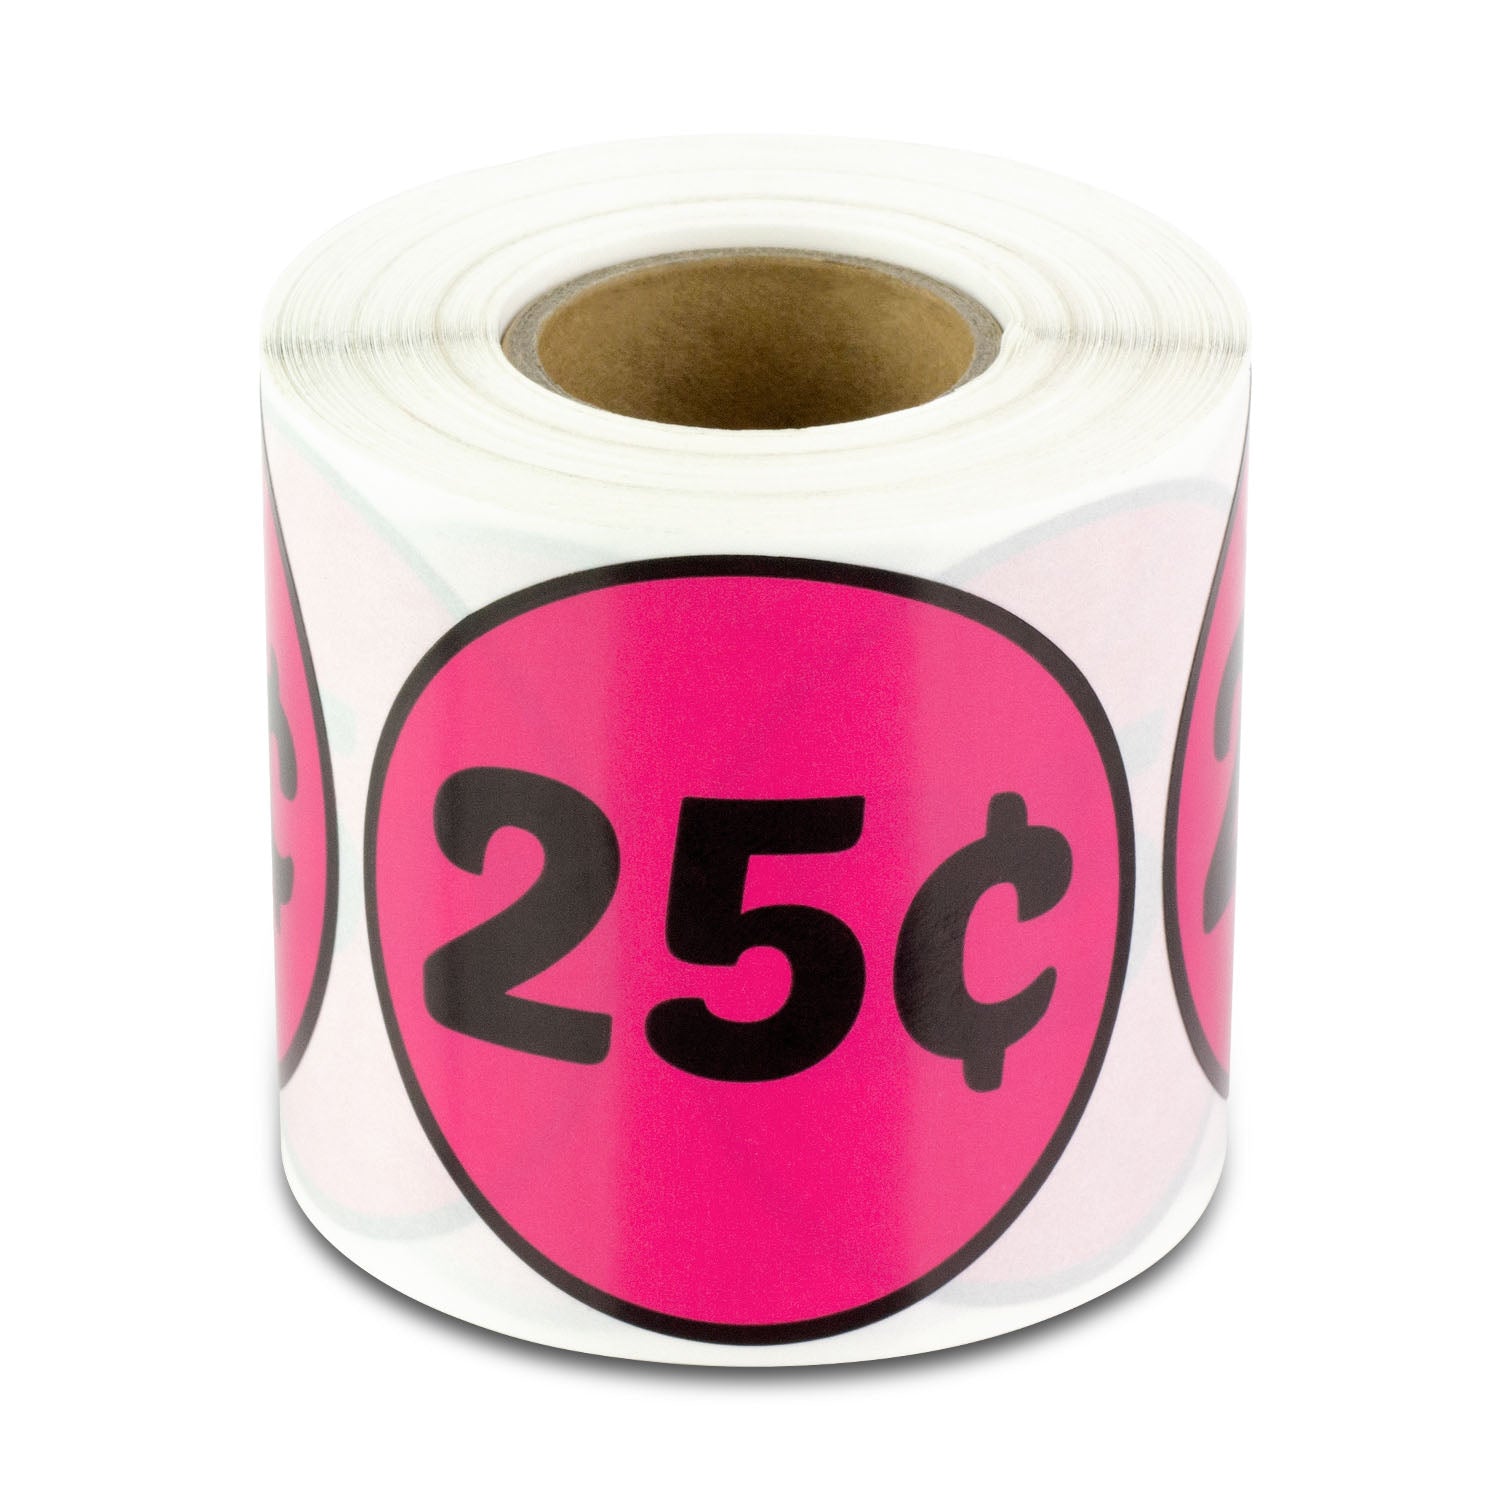 2 inch  Retail & Sales: 25 Cent Stickers / ¢25 Cent Price